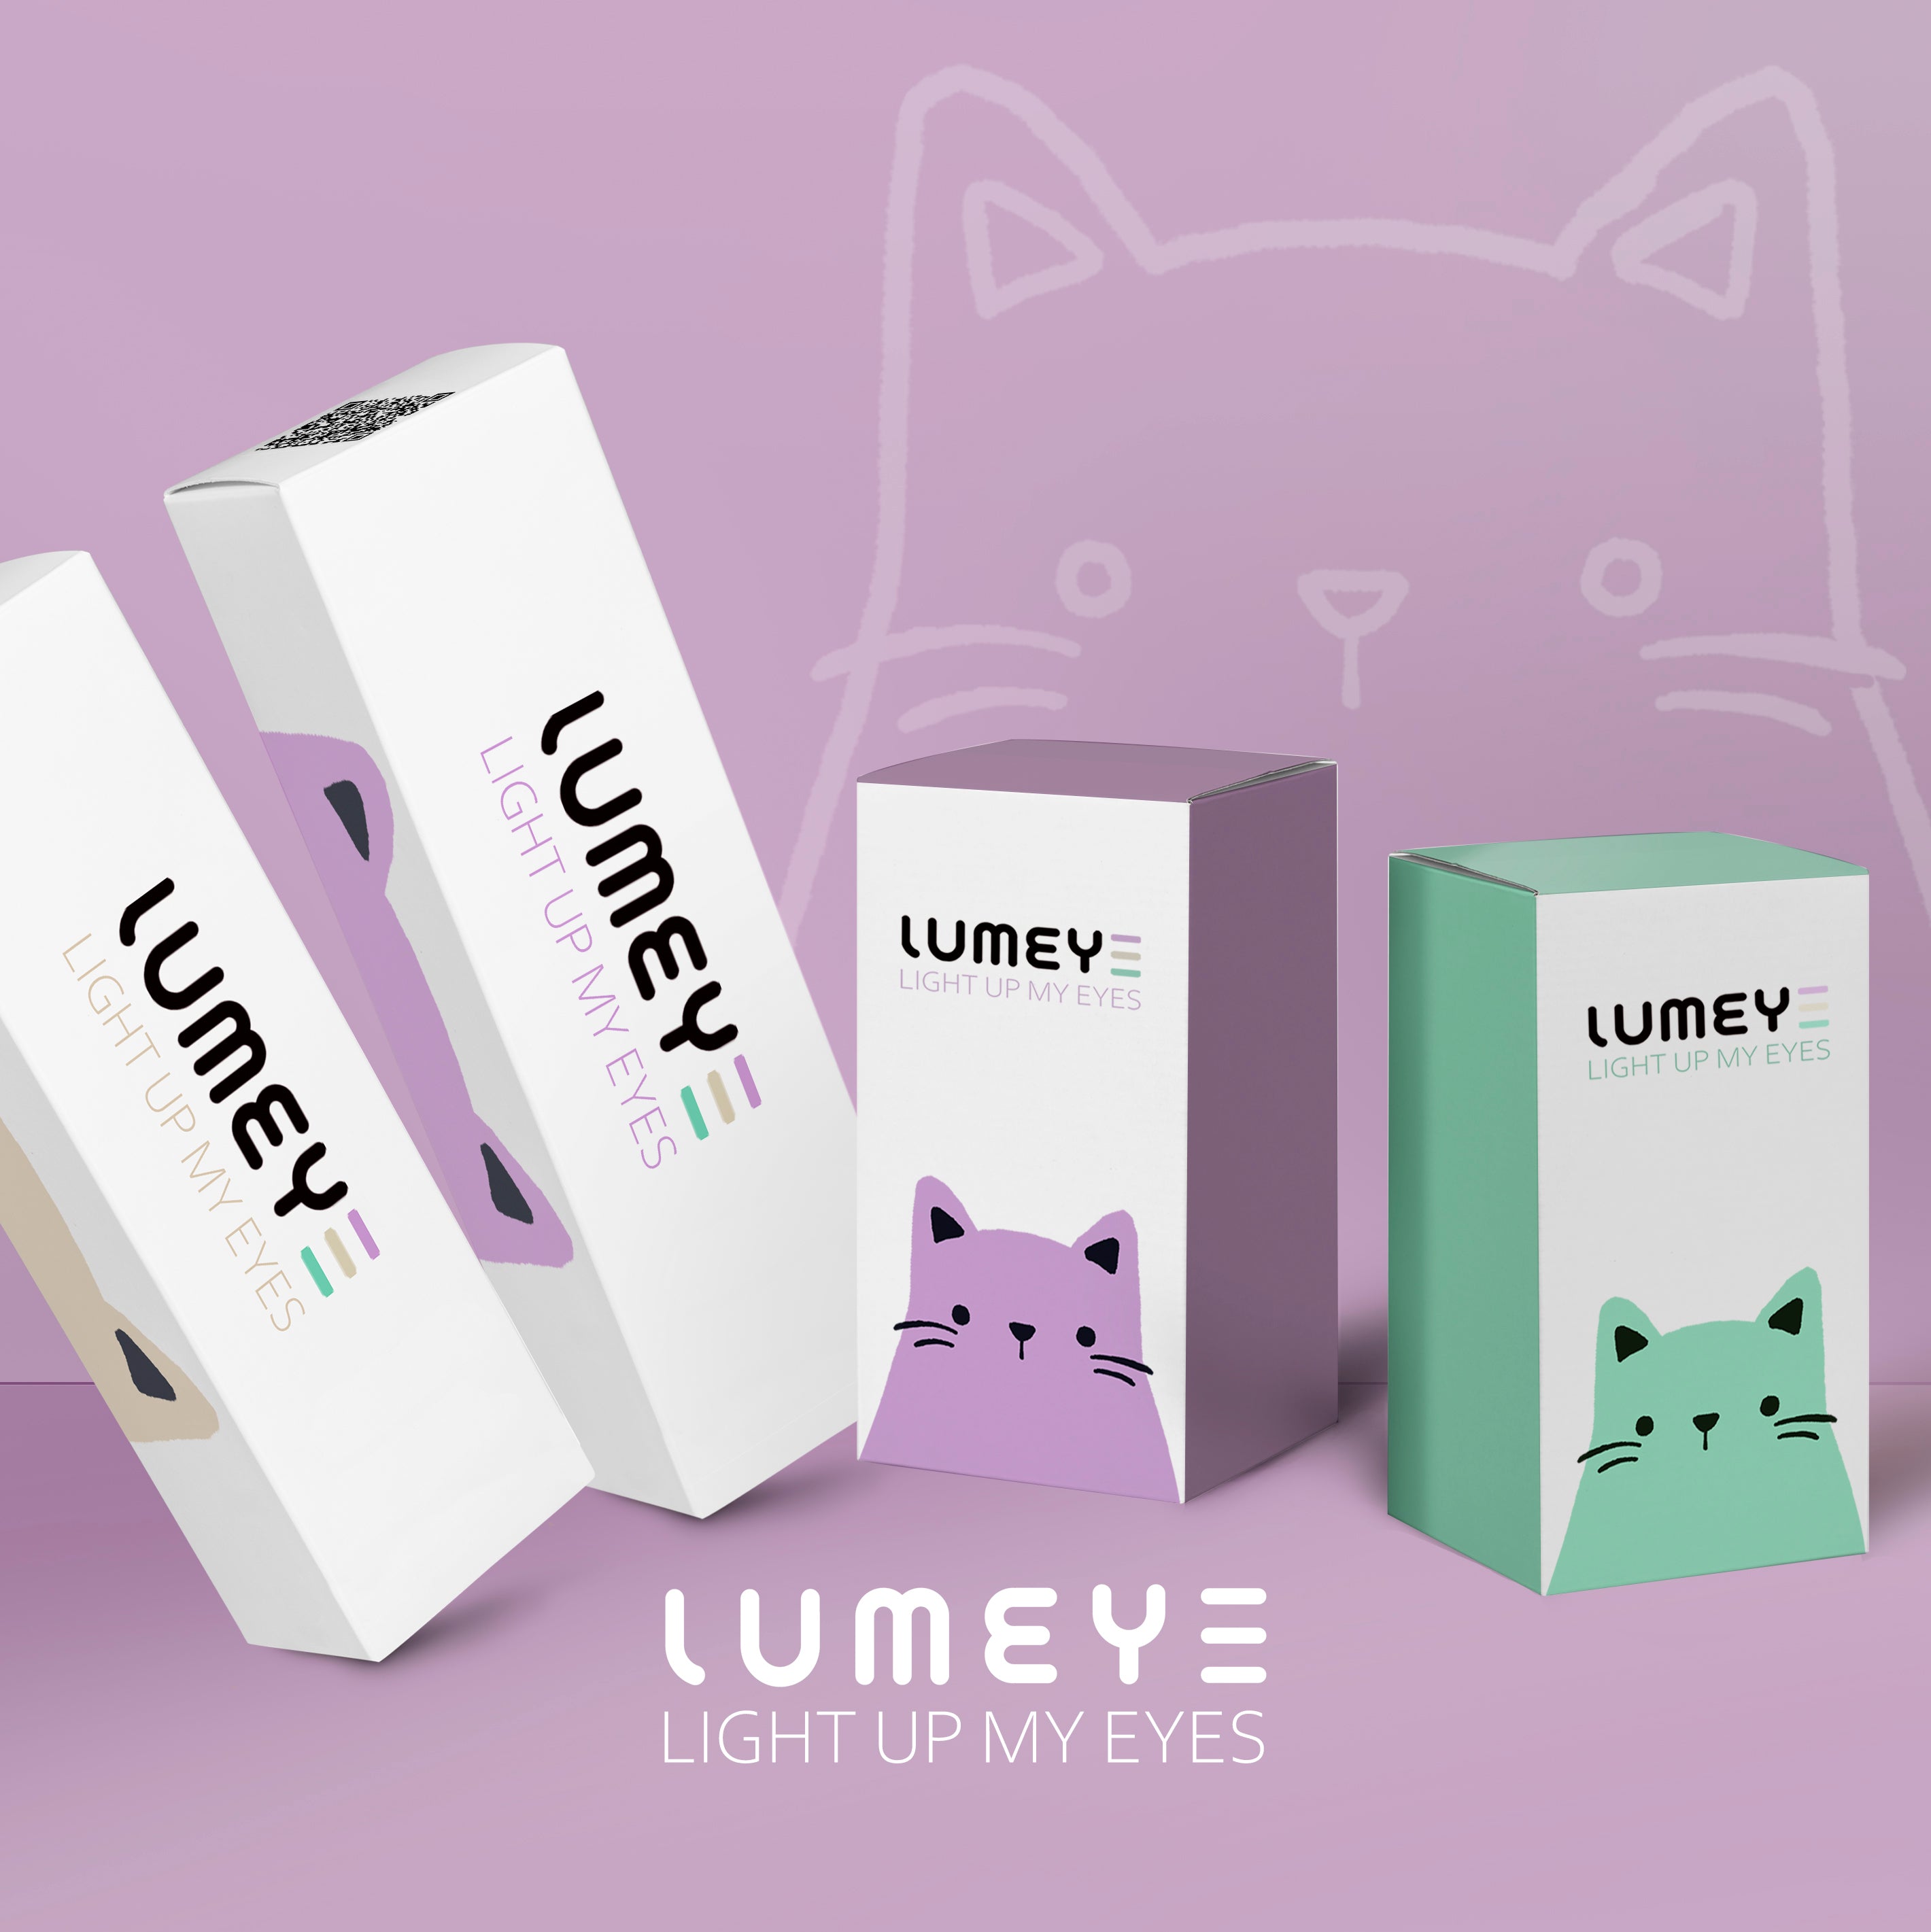 Best COLORED CONTACTS - LUMEYE Elf Purple Colored Contact Lenses - LUMEYE